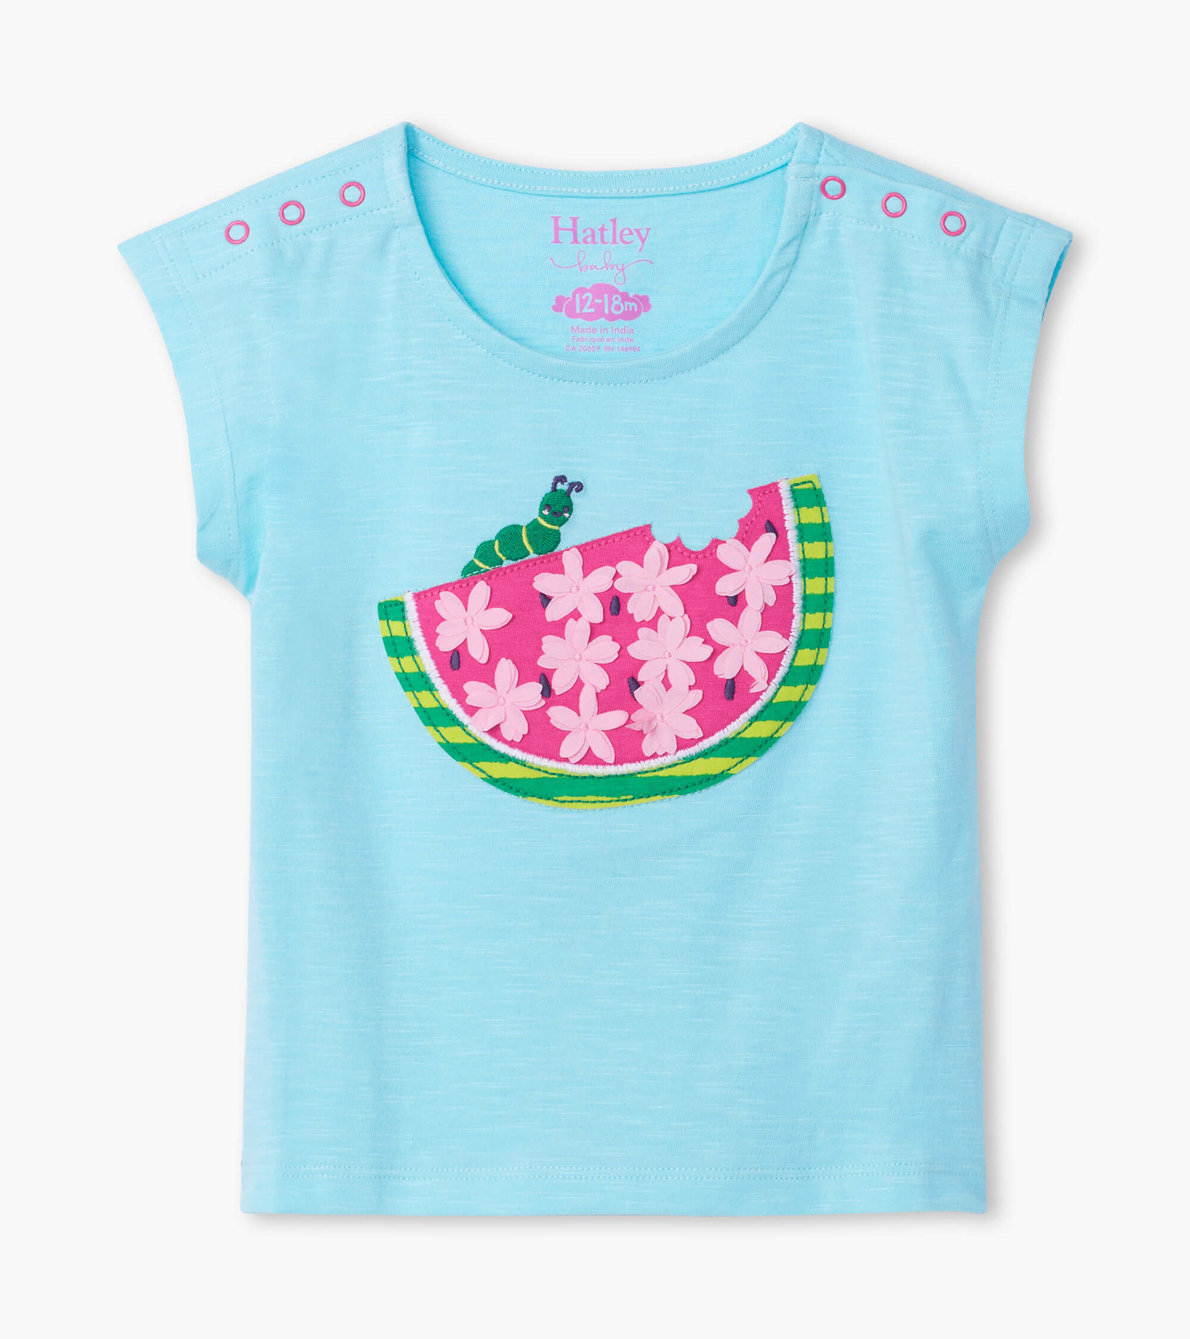 View larger image of Watermelon Slice Baby Tee